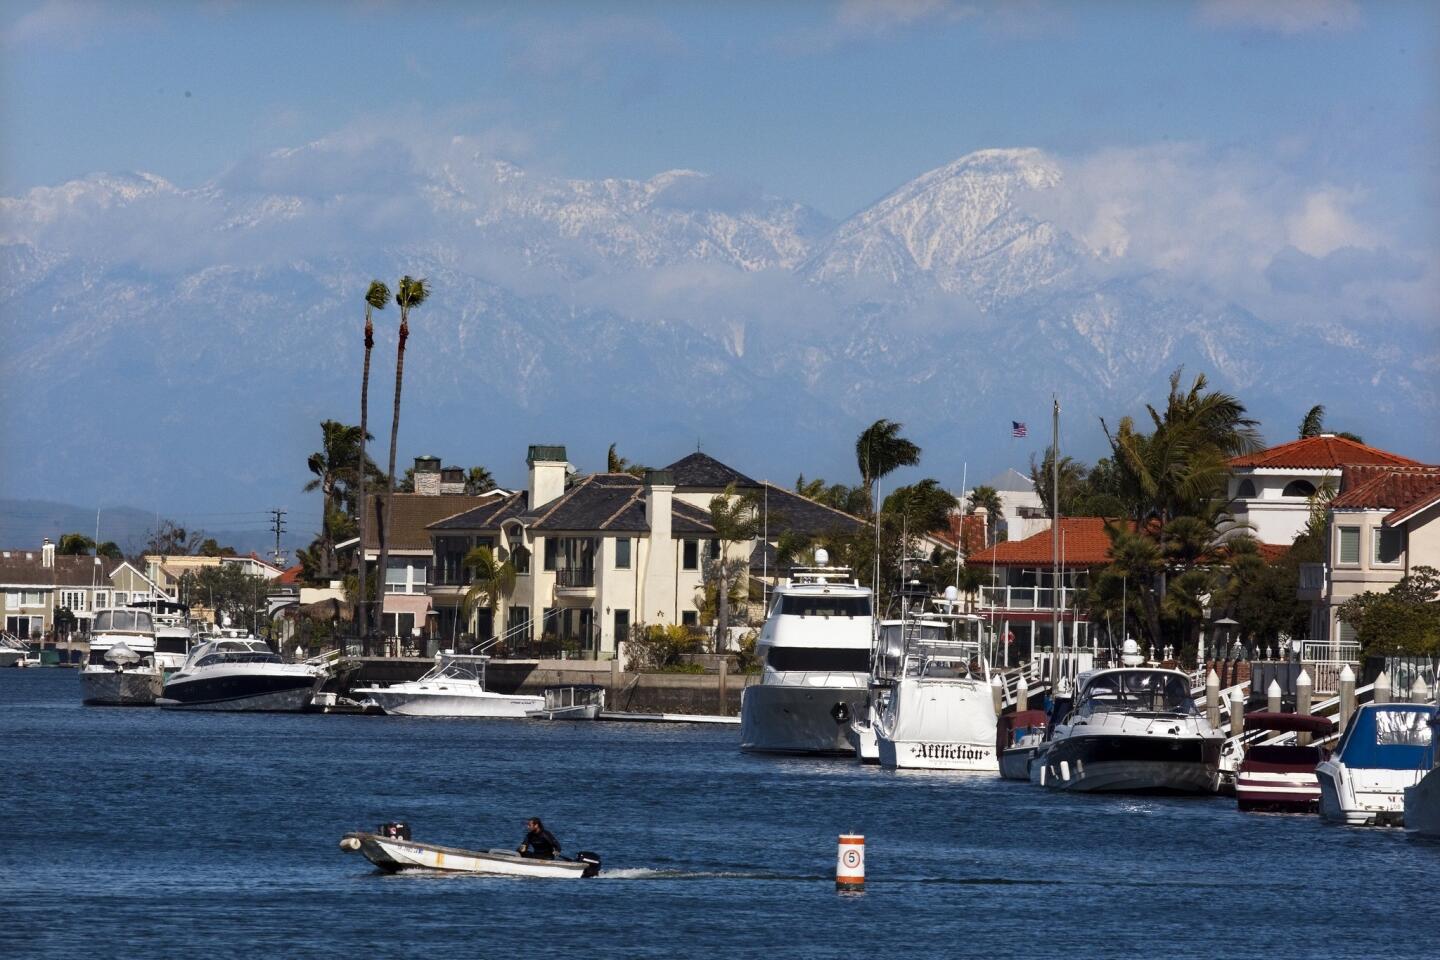 A motor boat cruises Huntington Harbour in Huntington Beach against a backdrop of the recently snowcapped San Gabriel Mountains.